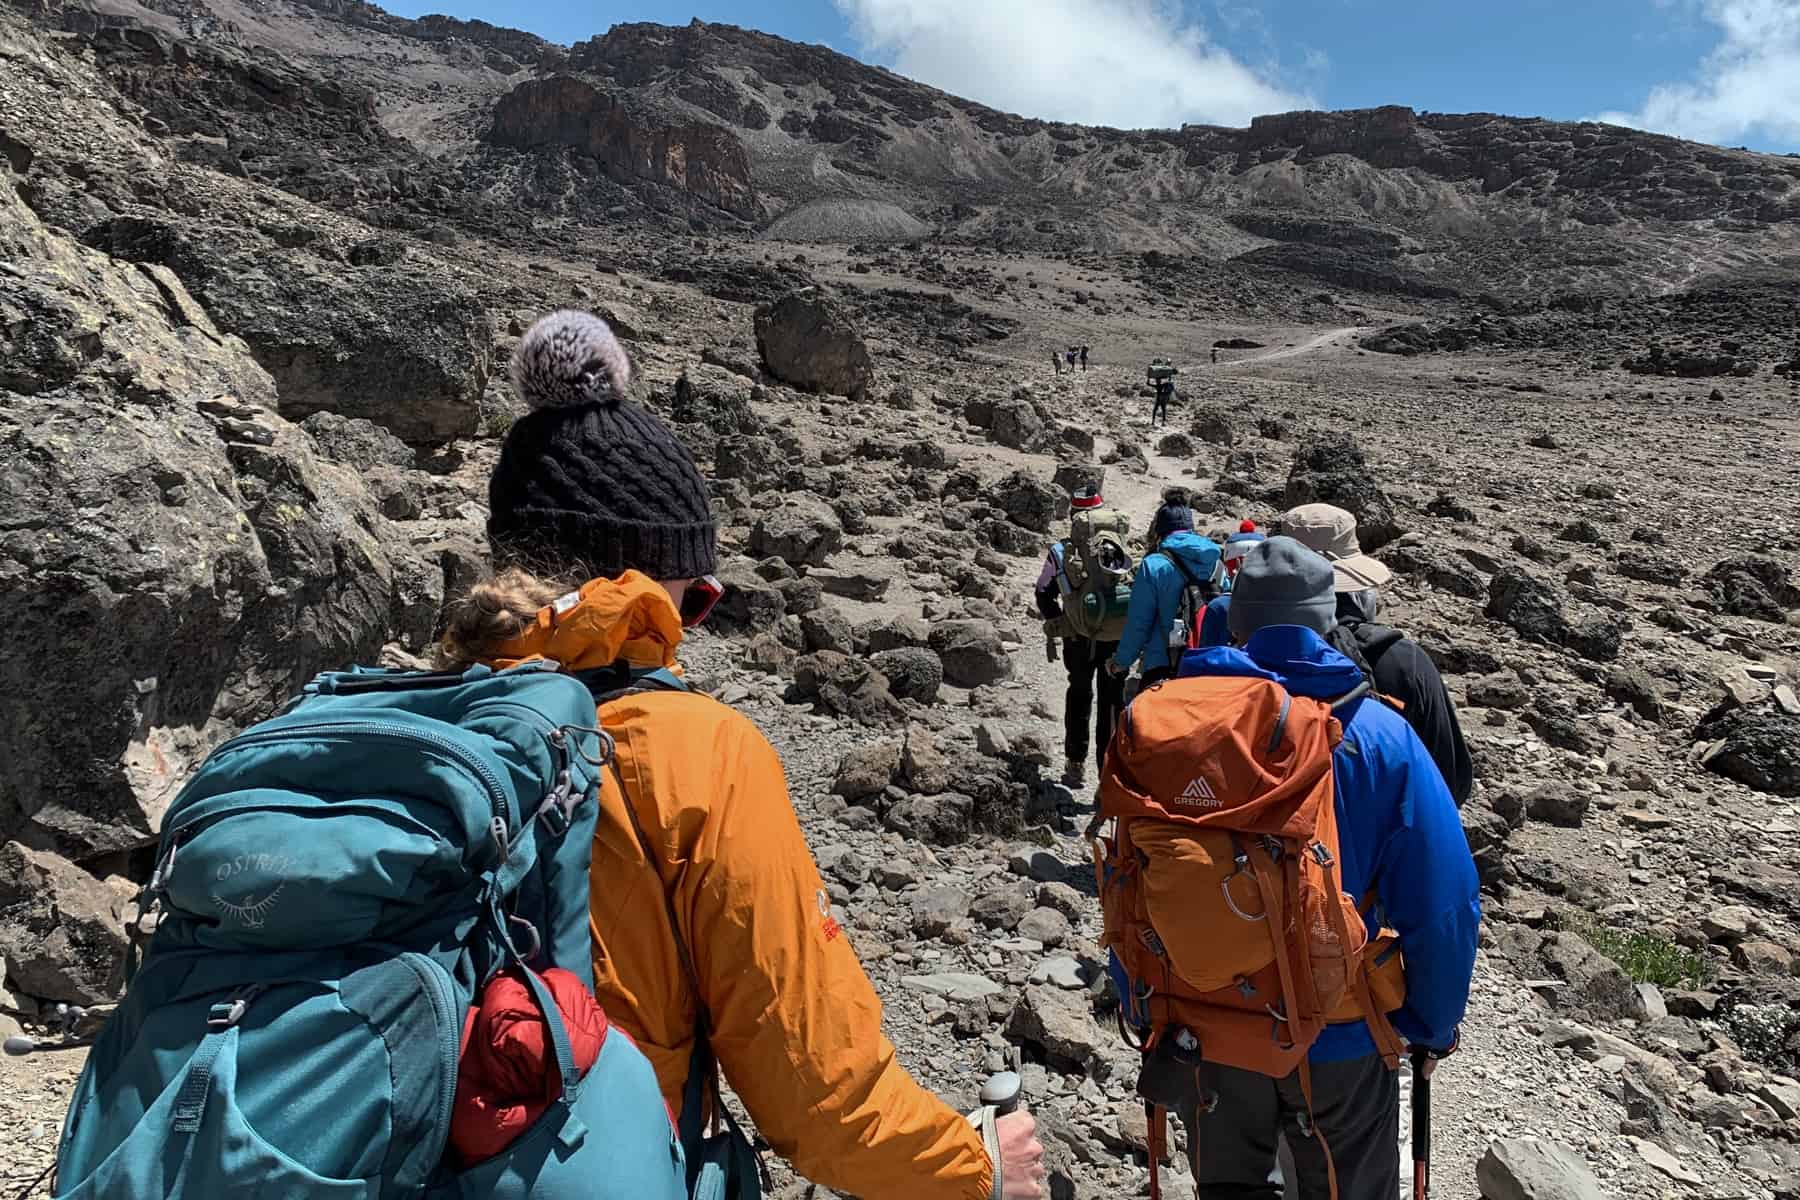 A woman in a orange jacket and blue backpack follows a line of other trekkers slowly climbing Kilimanjaro's dry, rocky scree